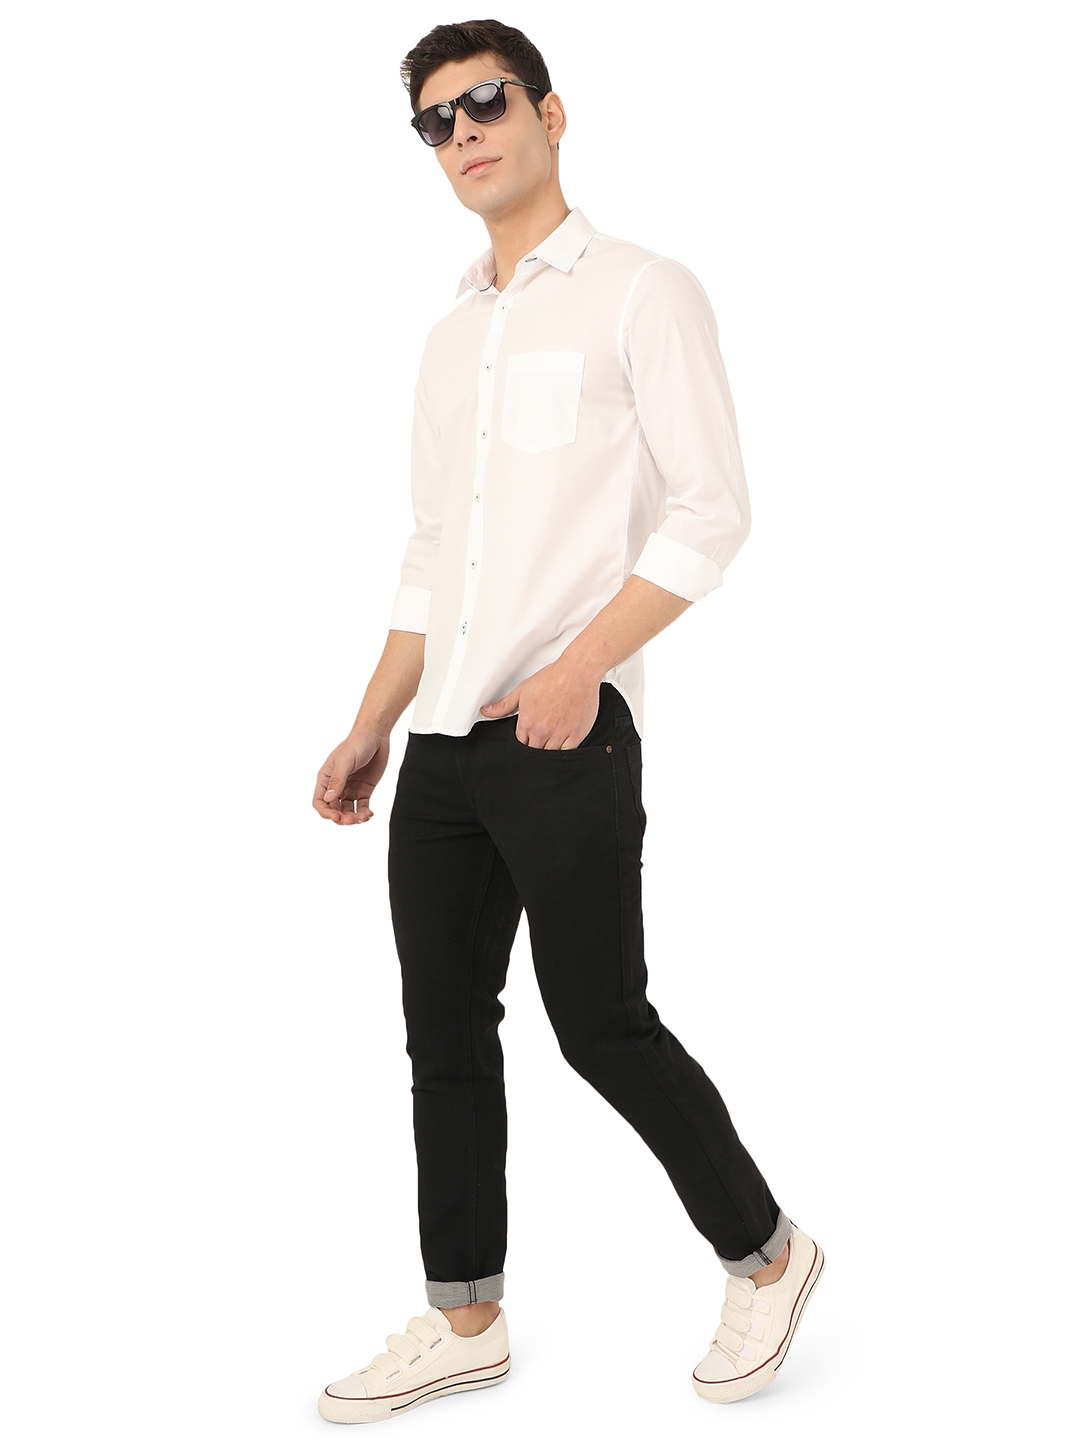 Greenfibre | Bright White Solid Slim Fit Semi Casual Shirt | Greenfibre 3